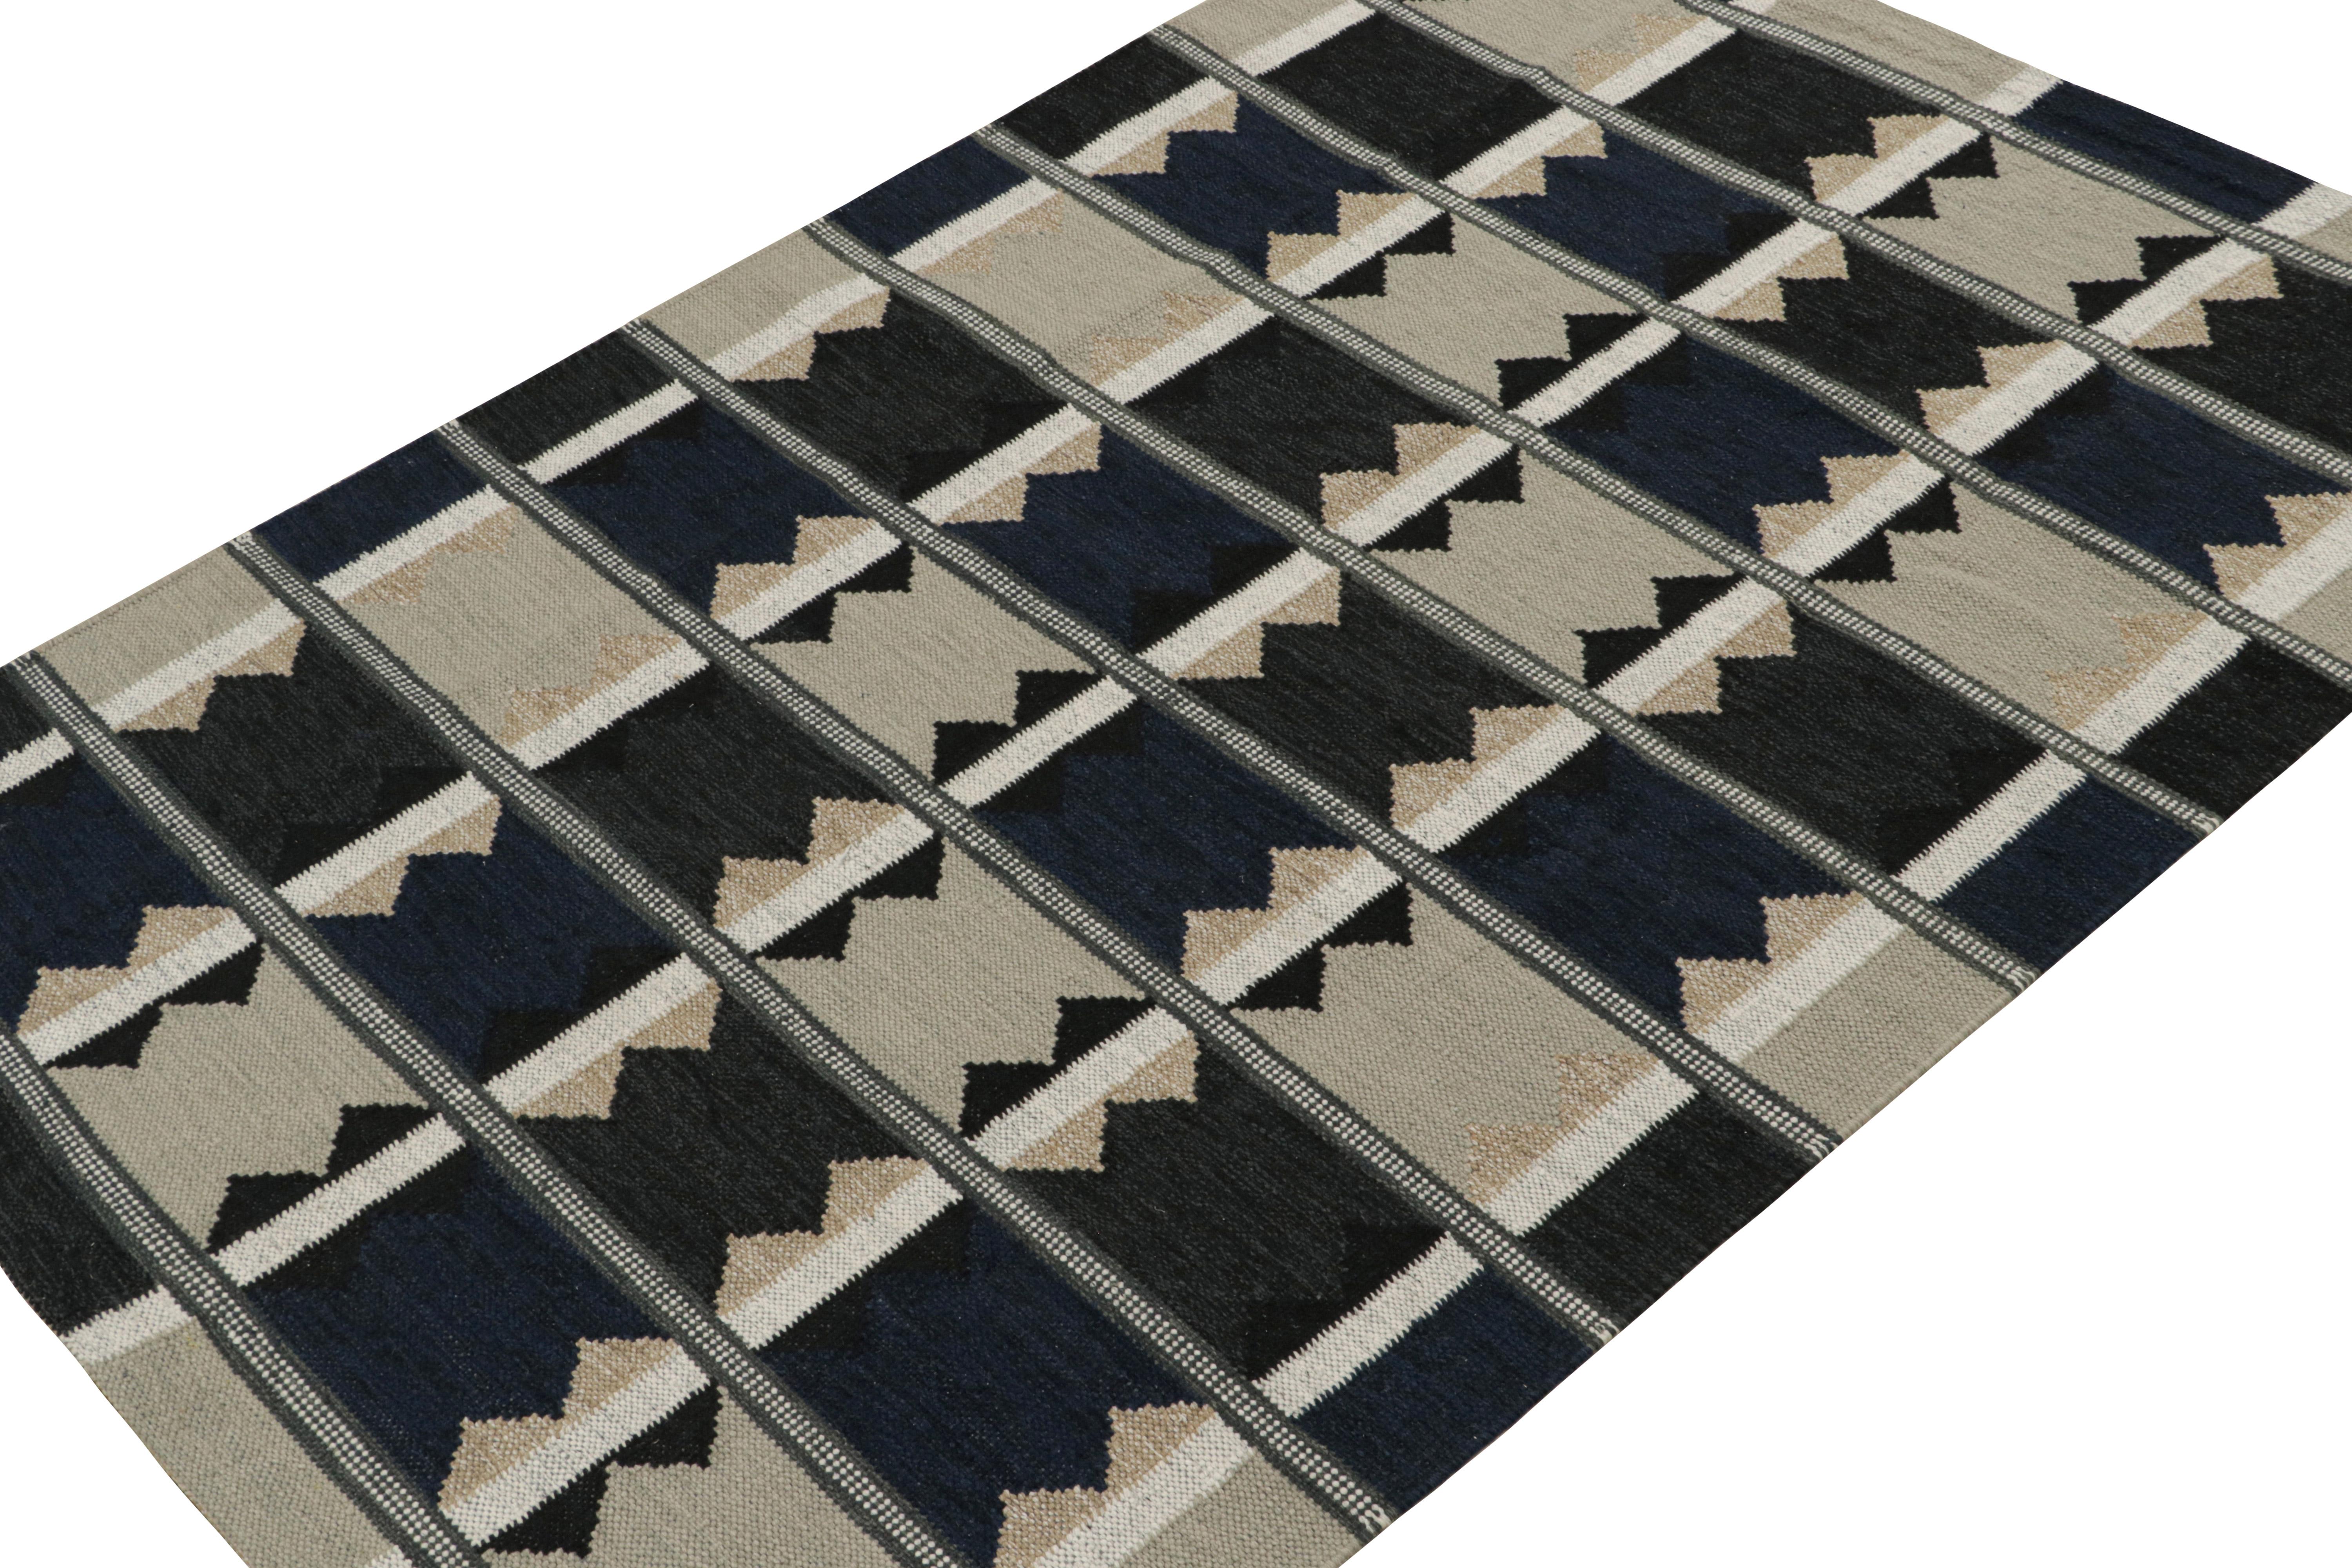 A cool 6x9 Swedish style kilim rug from our award-winning Scandinavian flat weave collection. Handwoven in wool, cotton & undyed natural yarns.

On the Design: 

This rug enjoys geometric patterns in tones of blue, black, gray & beige. Keen eyes